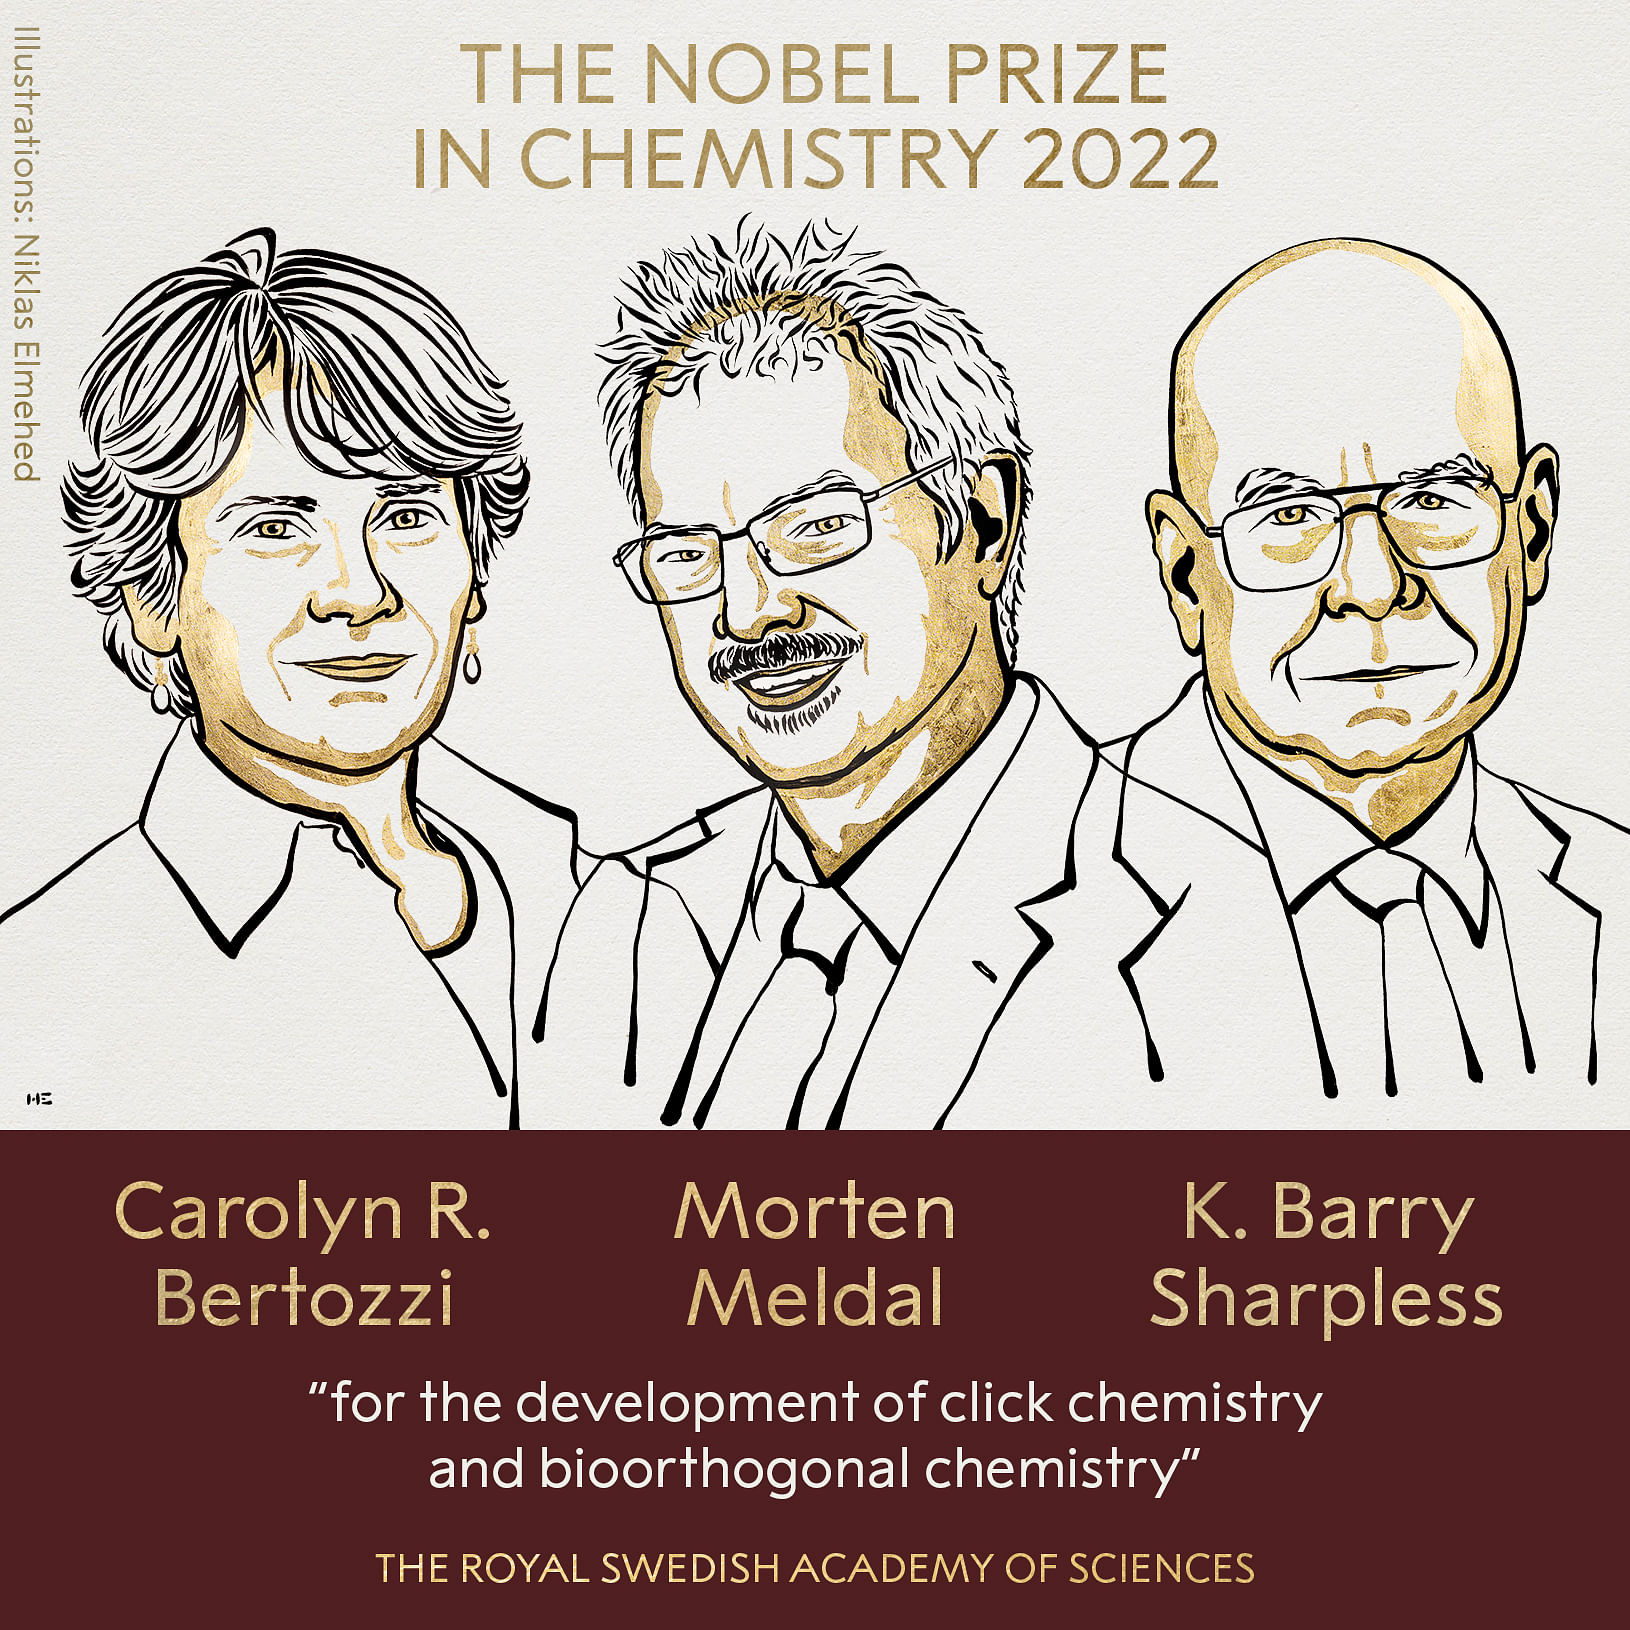 <div class="paragraphs"><p>The Nobel Prize for Chemistry 2022 was awarded to Carolyn R. Bertozzi, Morten Meldal and K Barry Sharpless.</p></div>